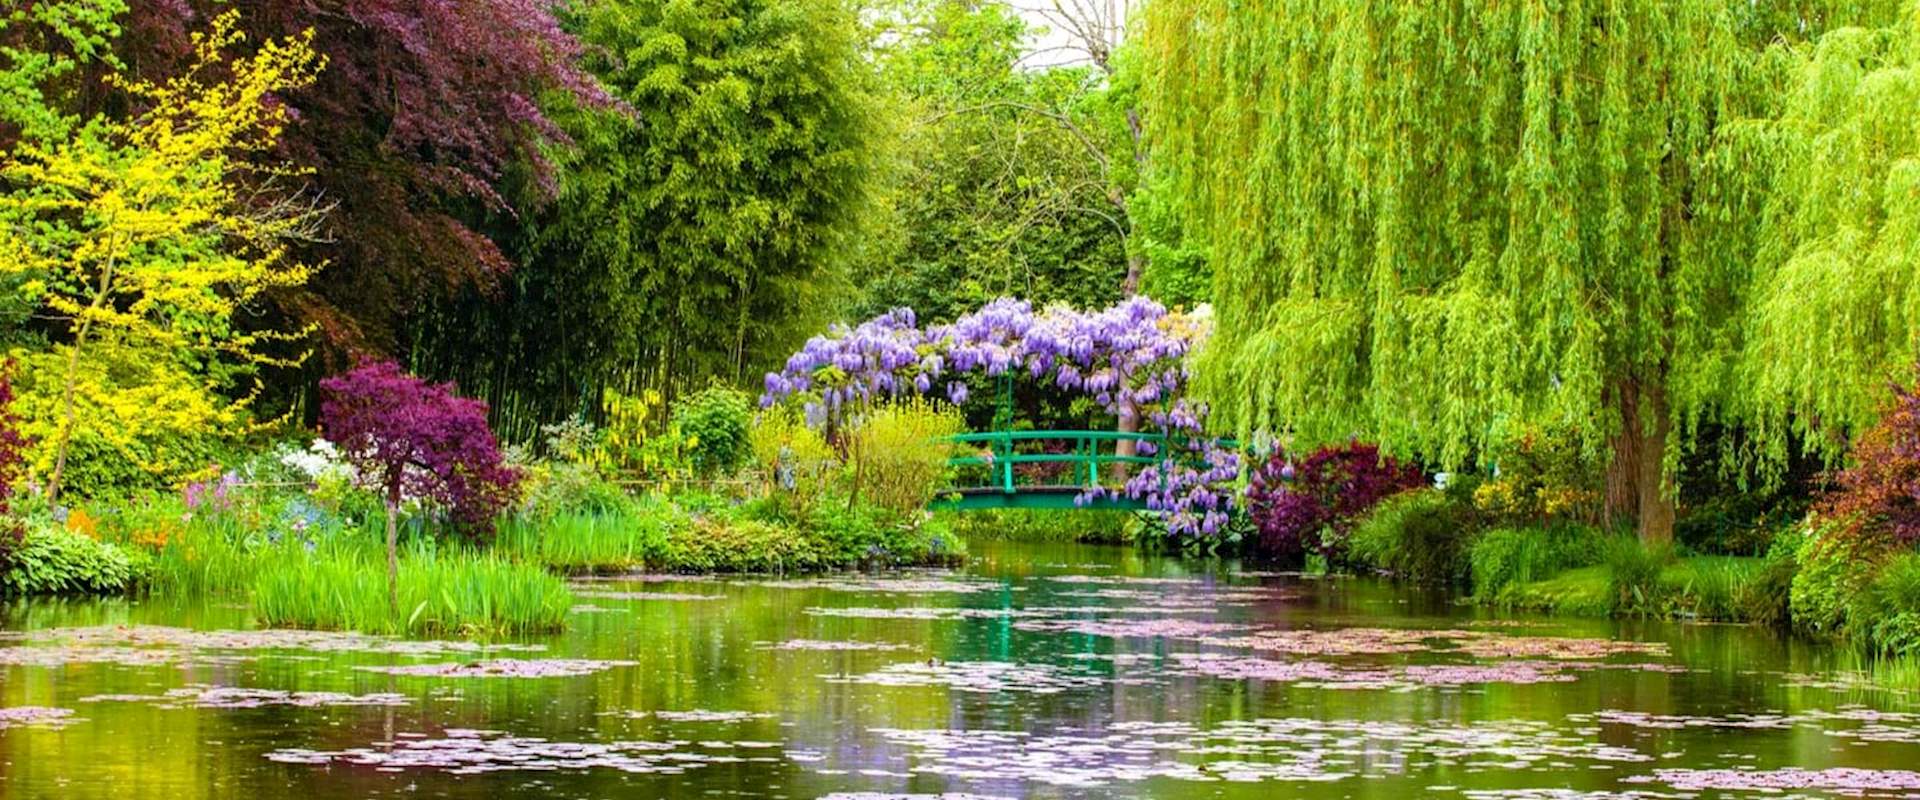 paris day trip giverny